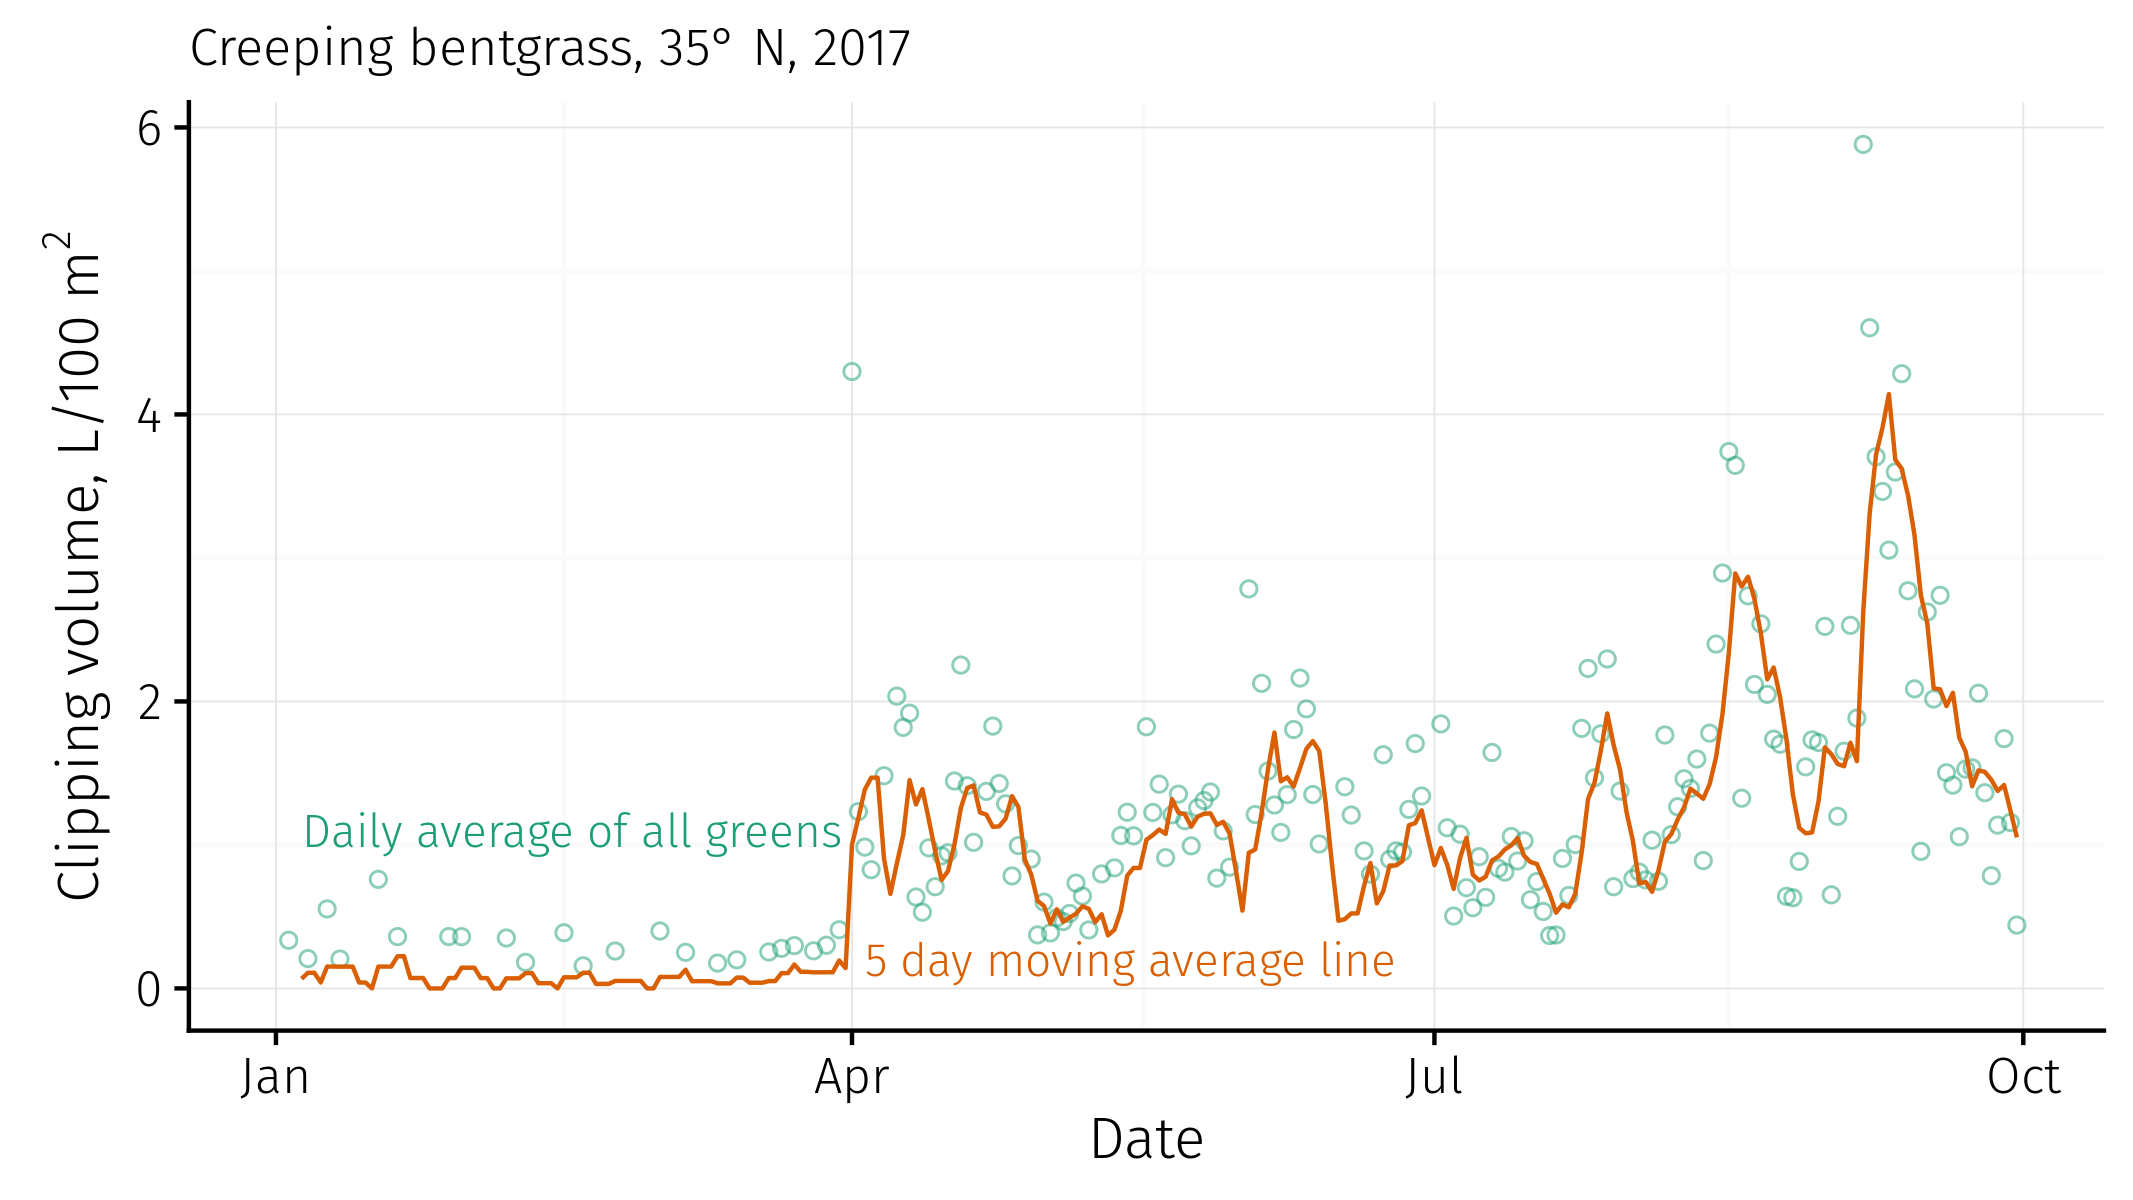 The daily average and a five day moving average of clipping volume from 19 greens at one facility